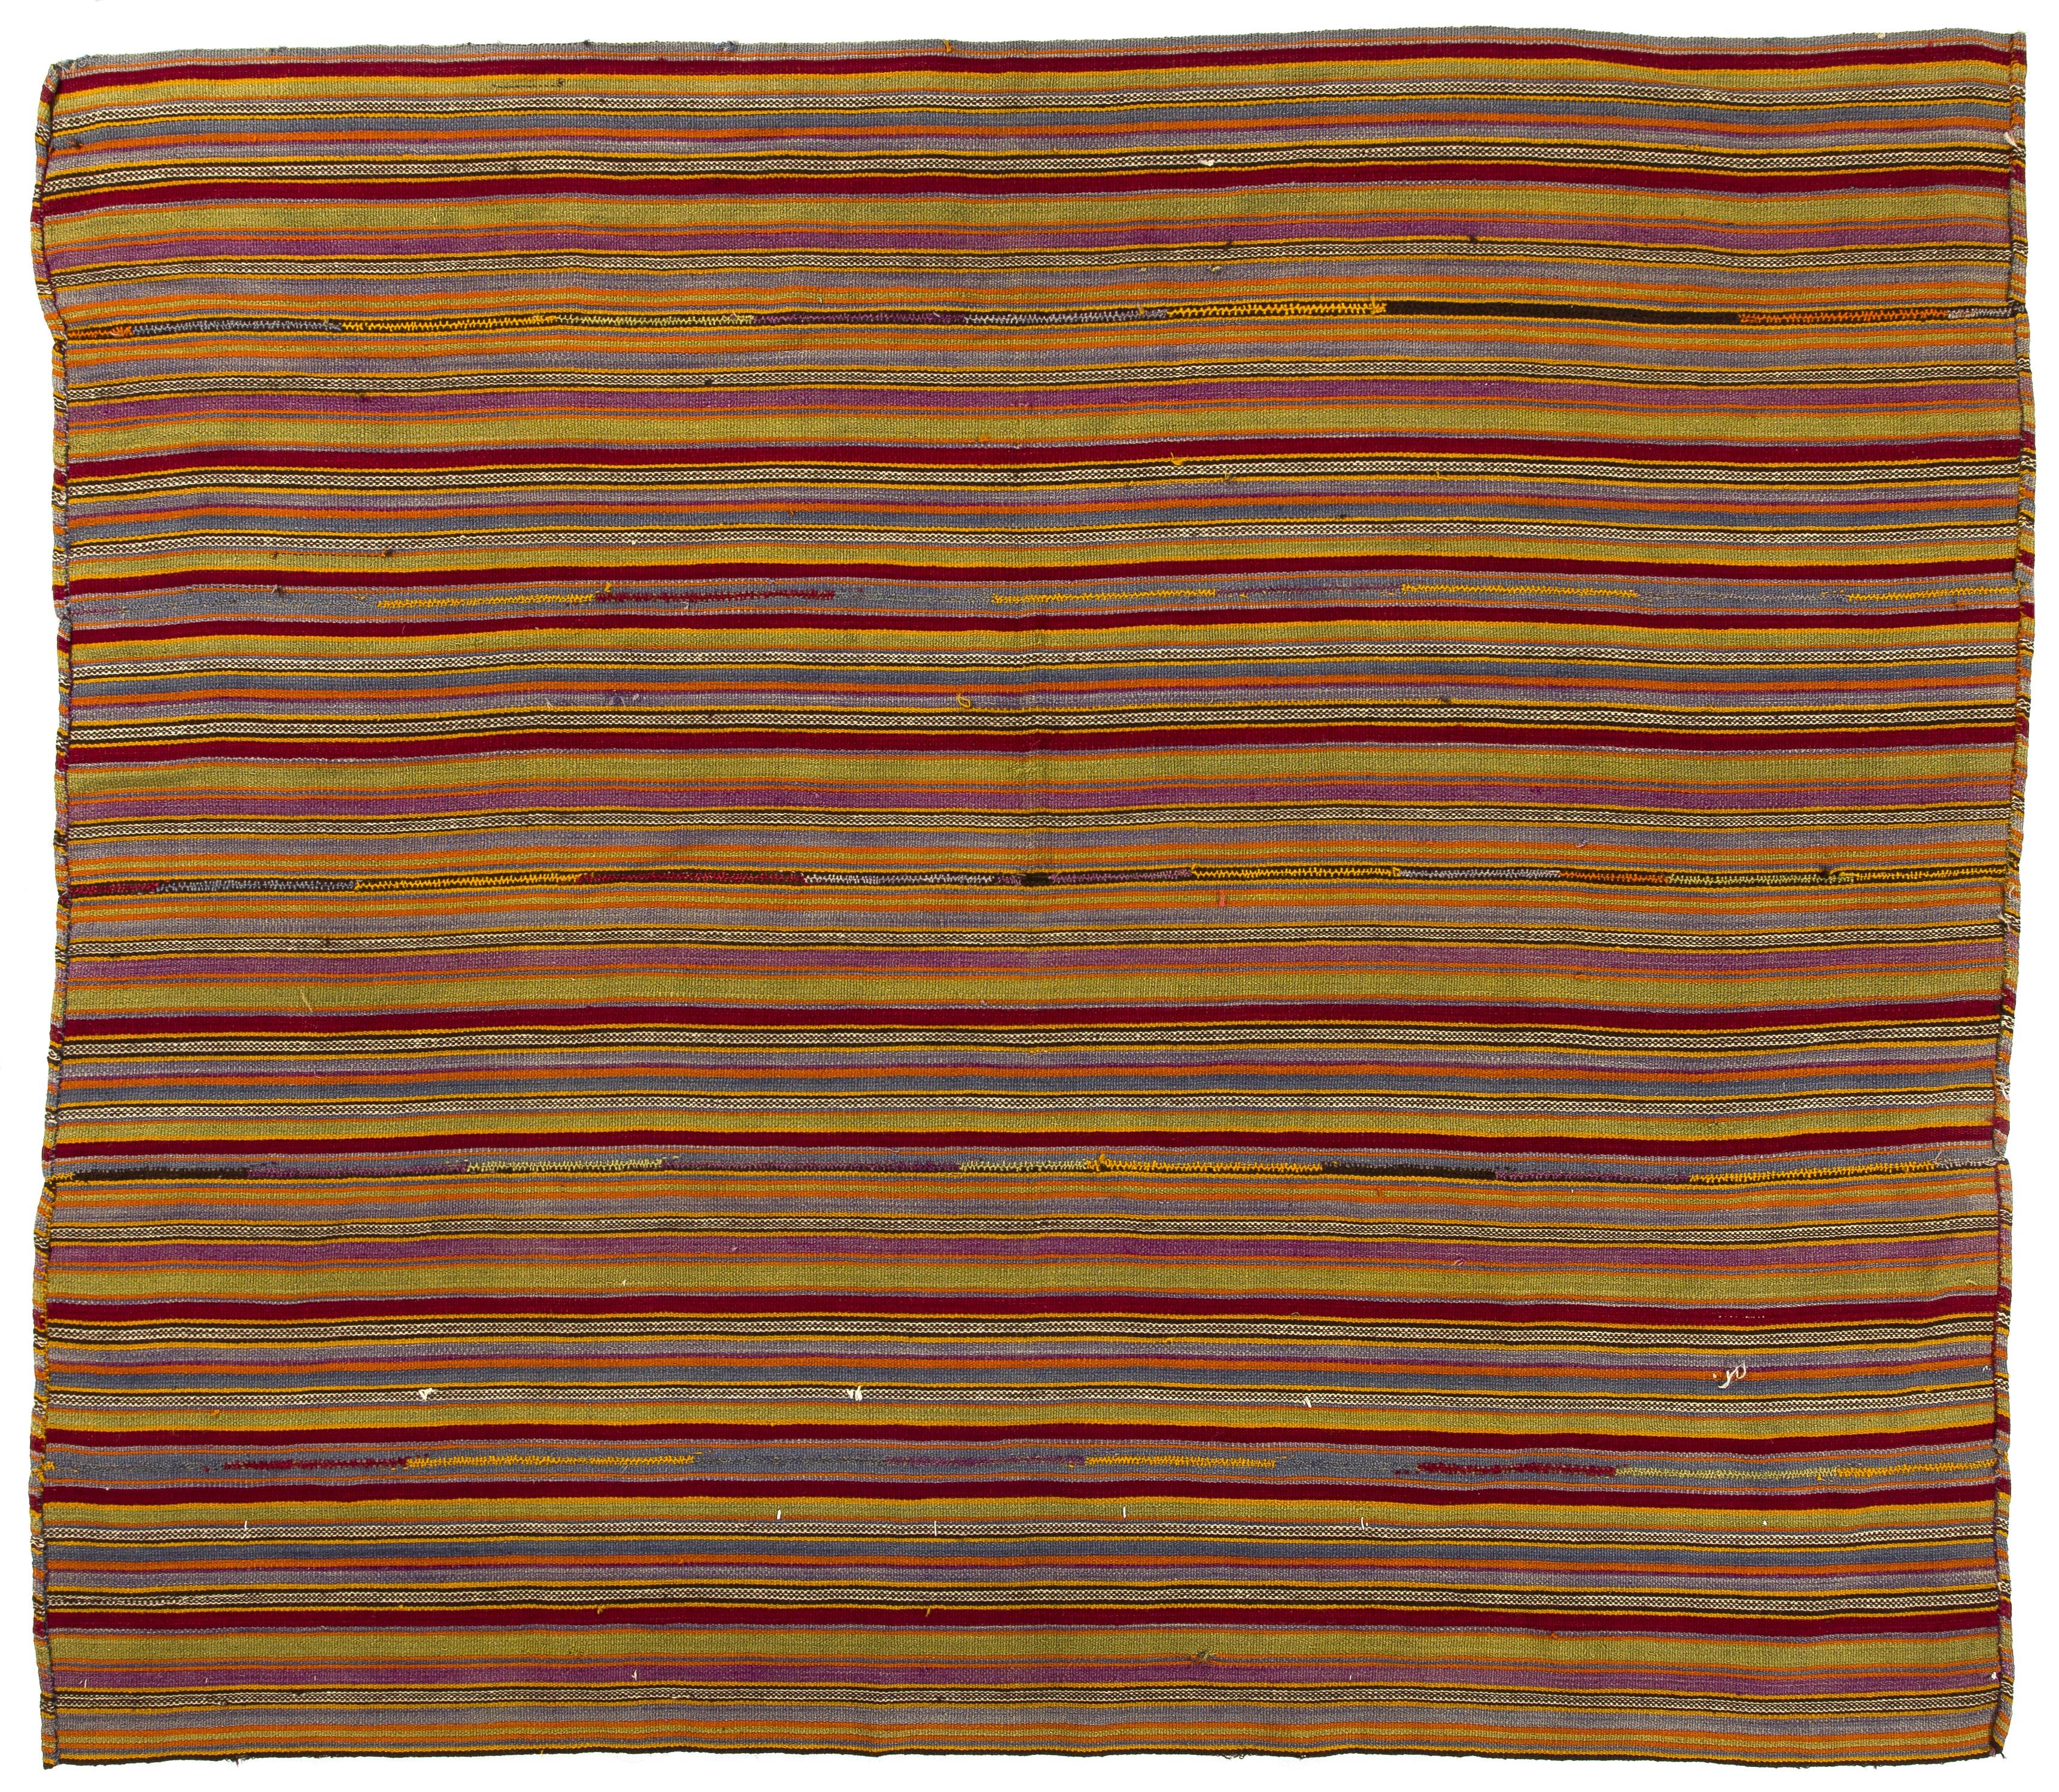 20th Century 6.2x7.2 Ft Vintage Hand-Woven Kilim. Wool Flat-Weave Rug with Vertical Bands For Sale